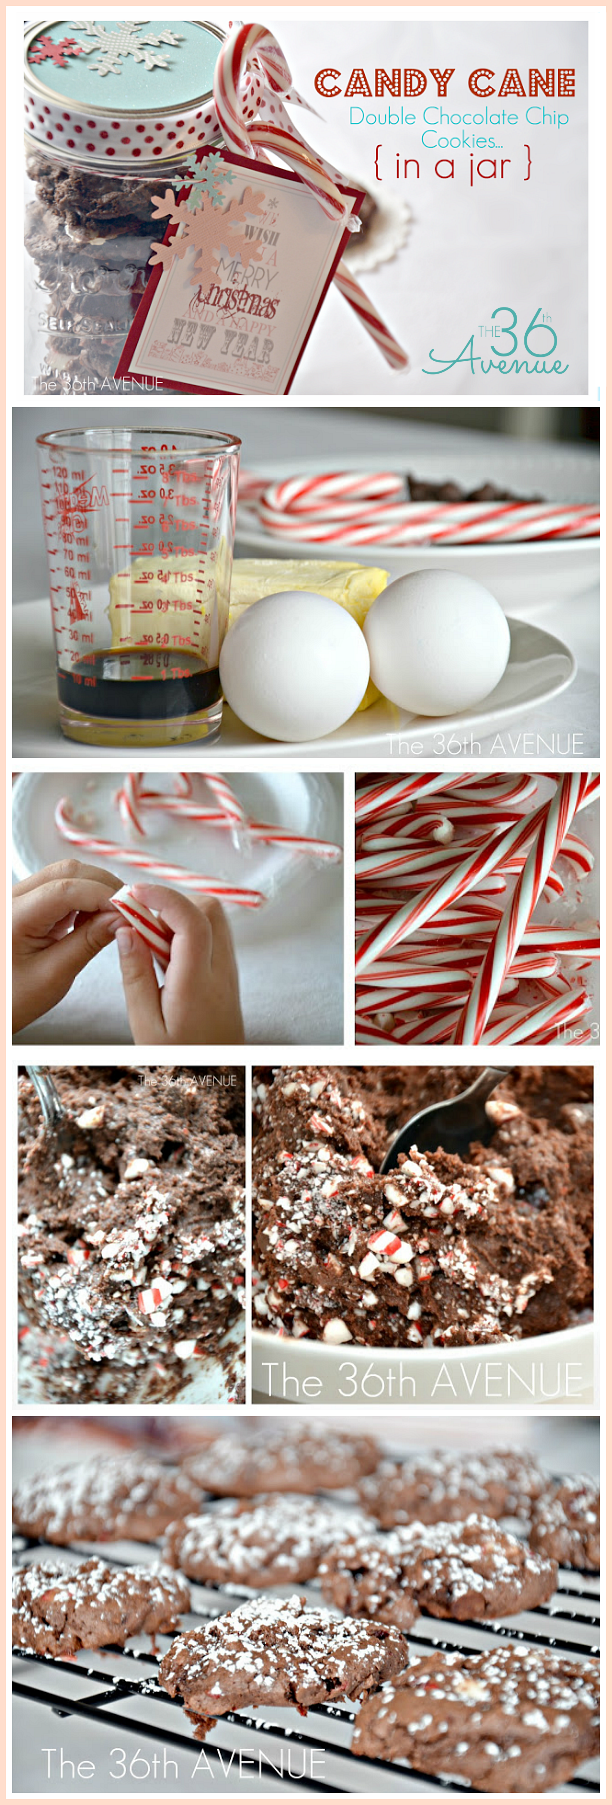 Candy Cane Mint Cookie Recipe the36thavenue.com Bake them and get the Free Printable to give them as gifts. 